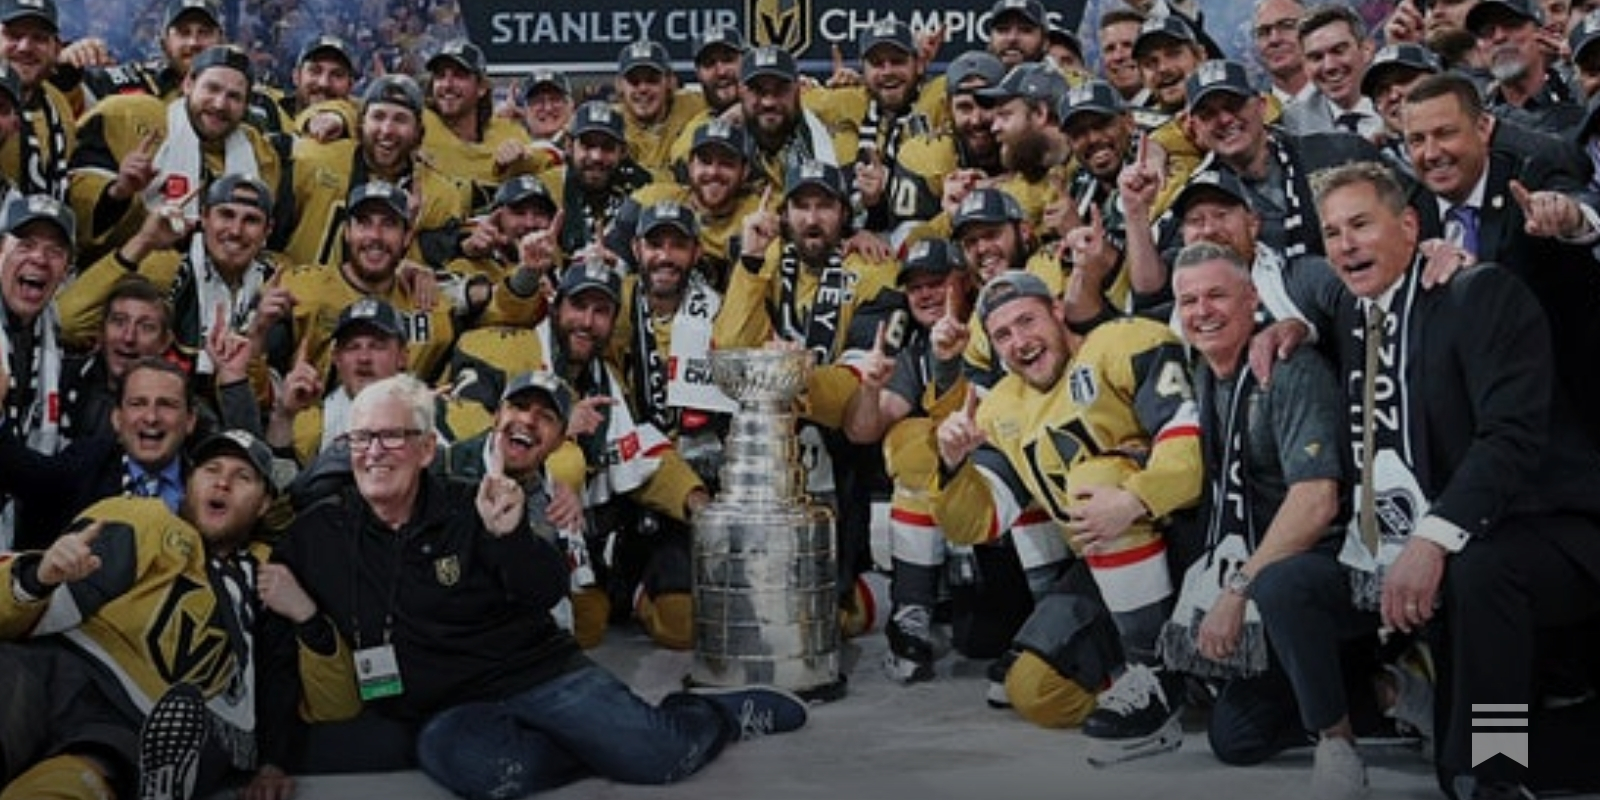 Emily's husband Will & his team the Vegas Golden Knights won the Stanley Cup  - here's baby Beckham in the cup 🫶🏻 : r/TheBachelorette